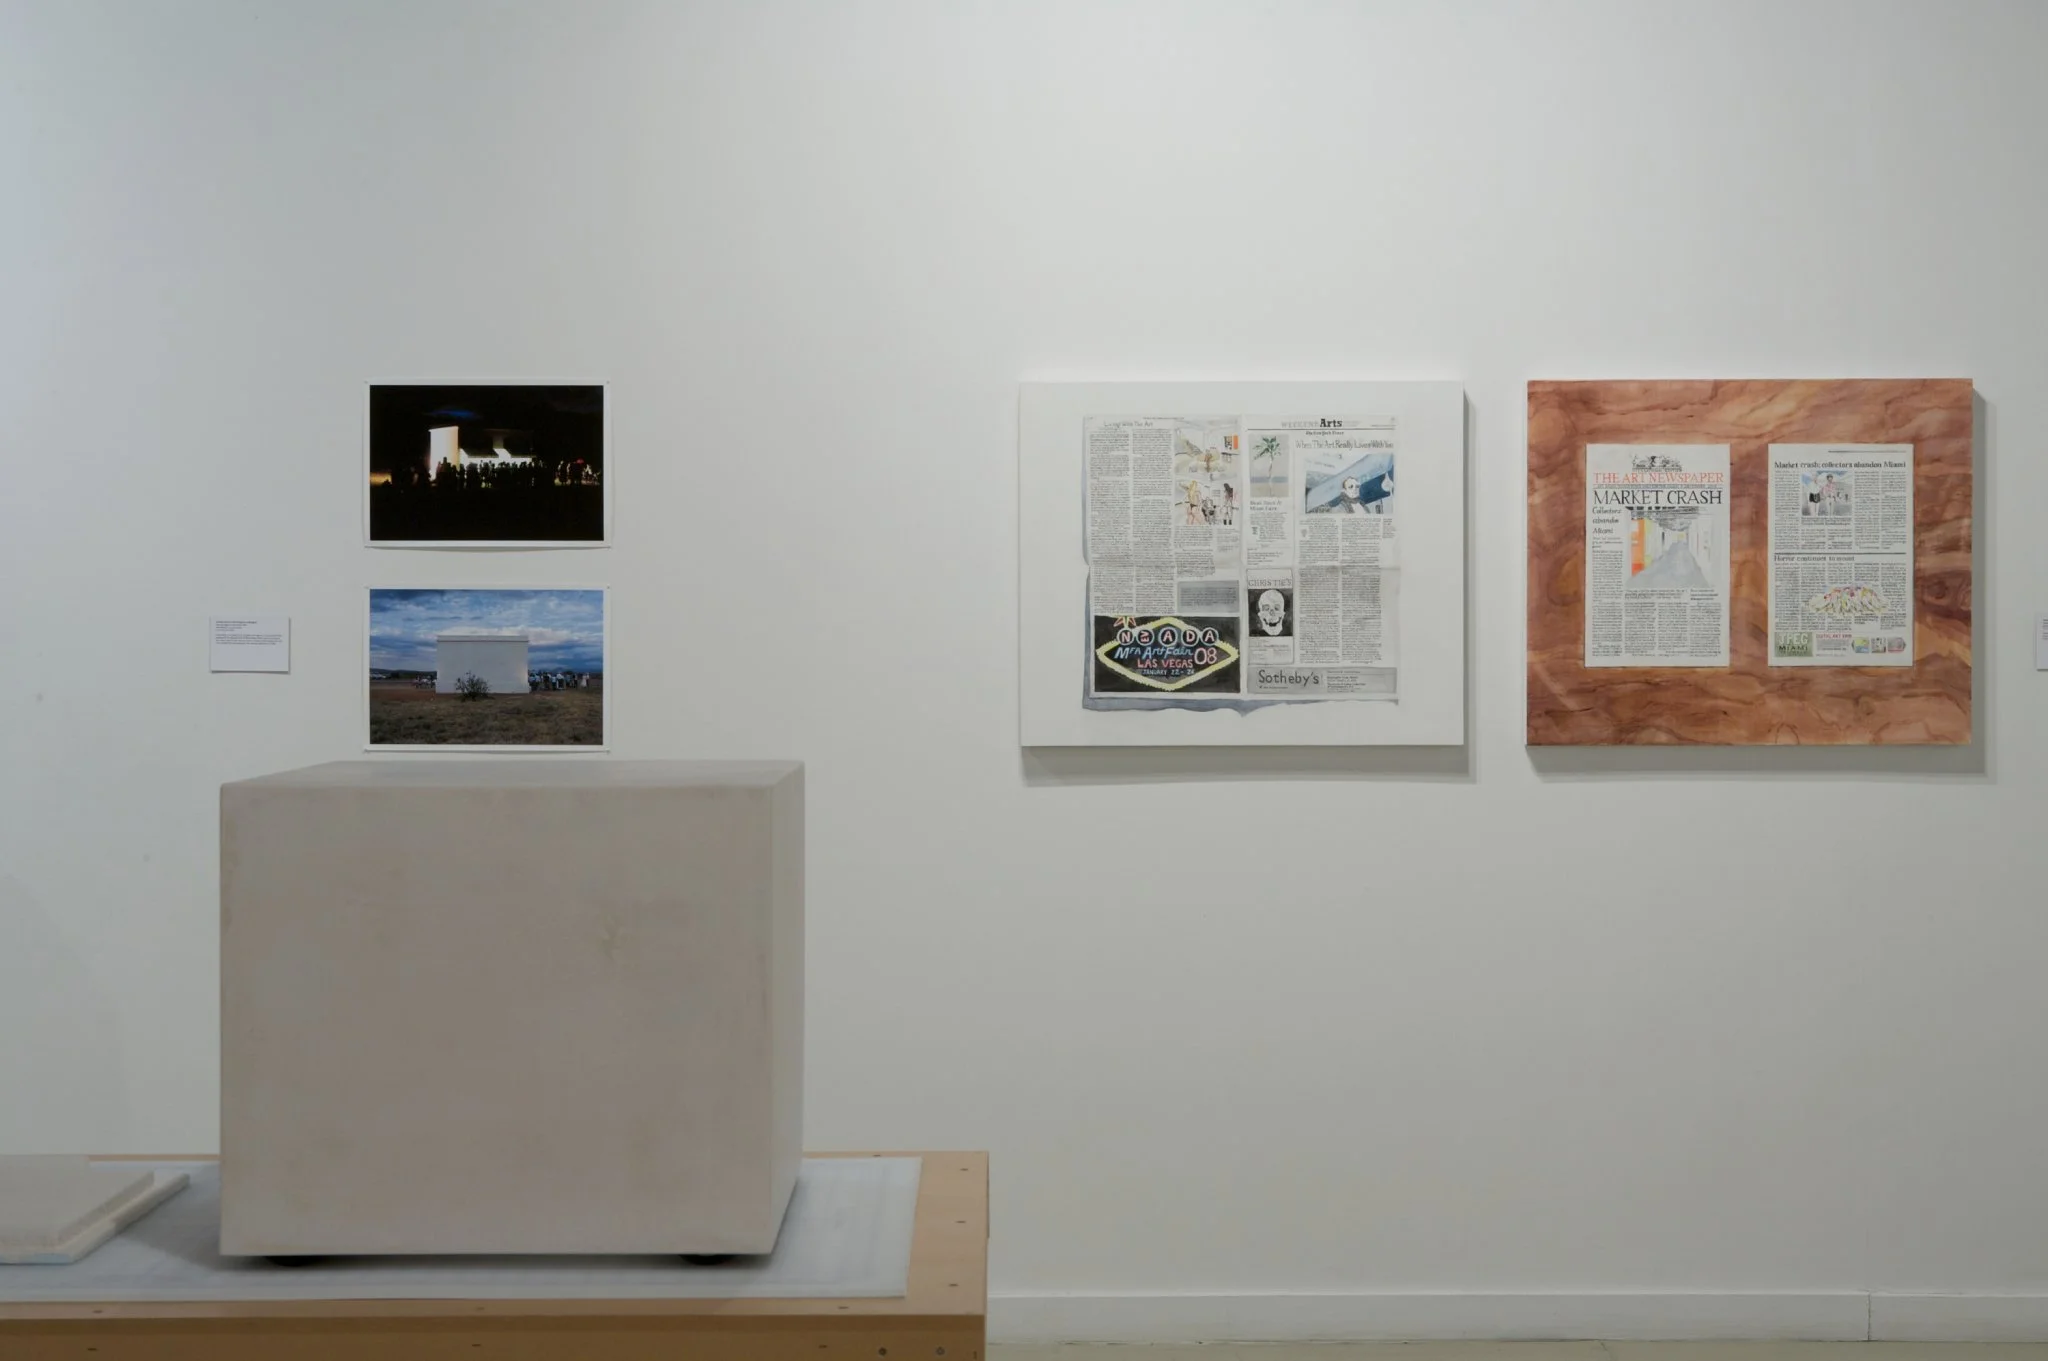 Installation view, "Air Kissing: An Exhibition of Contemporary Art About the Art World", 2008, Spruance Gallery